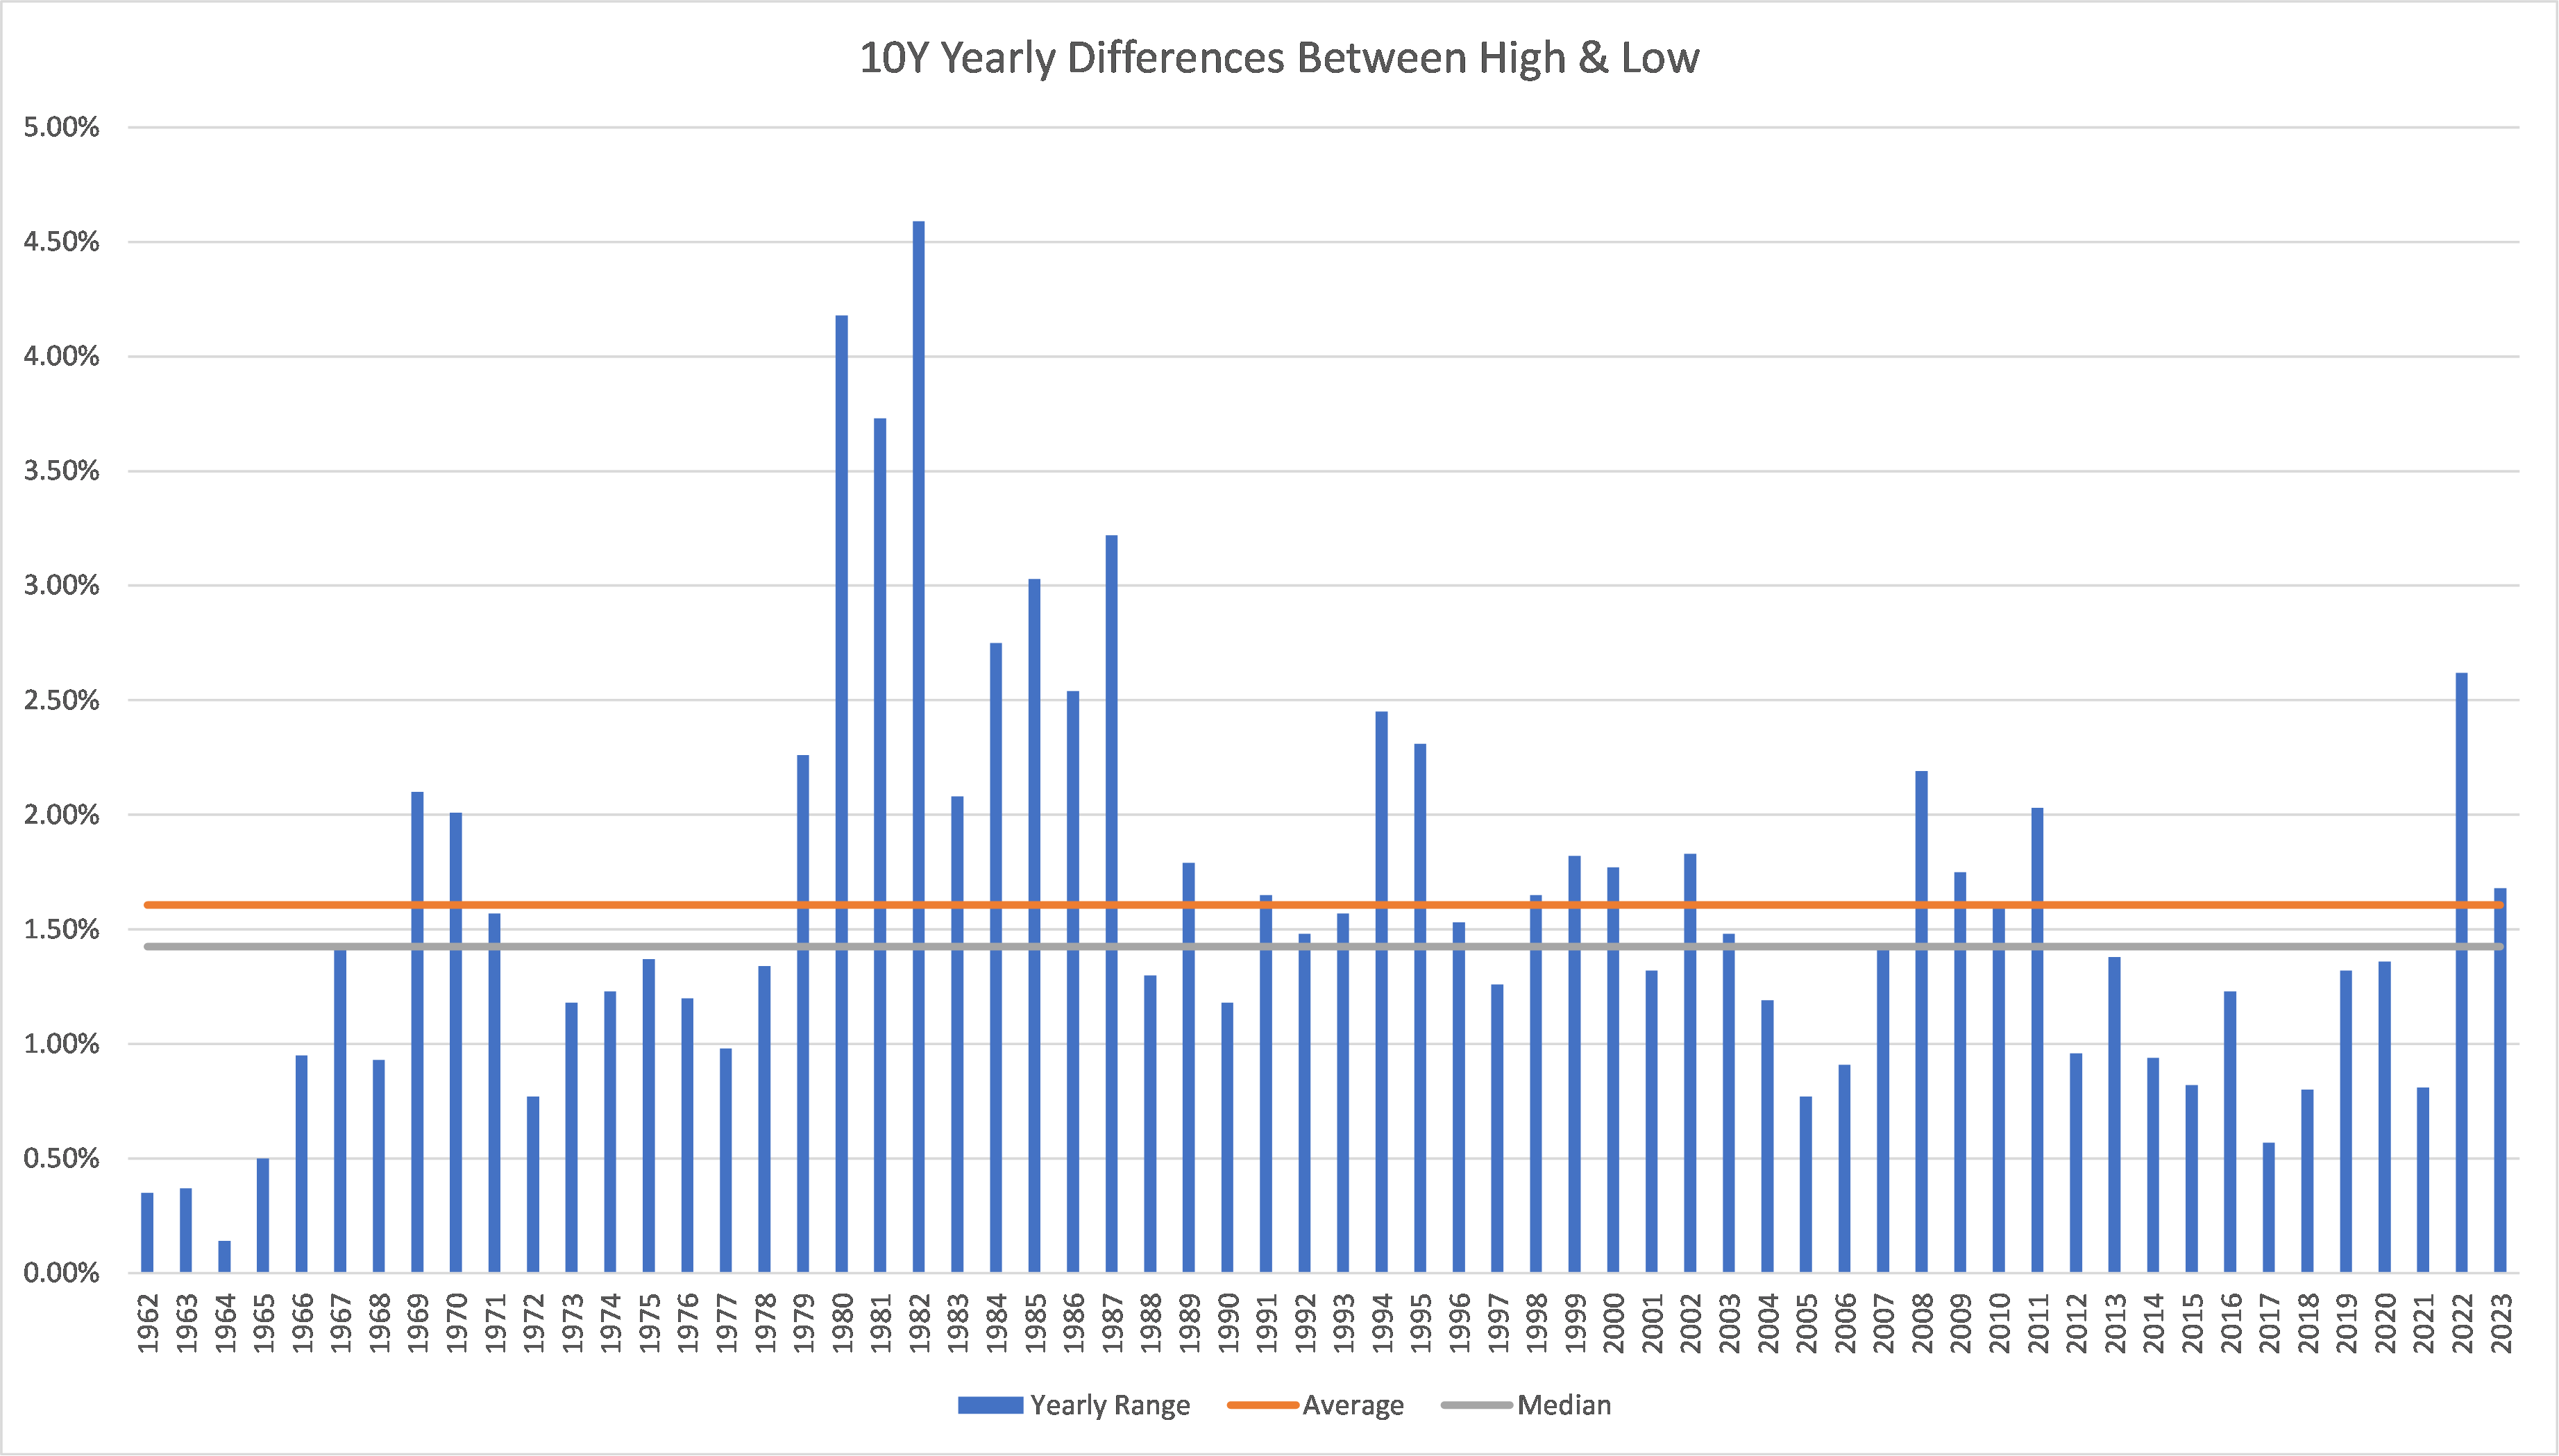 Bar and line graph showing 10 year differences between high and low 